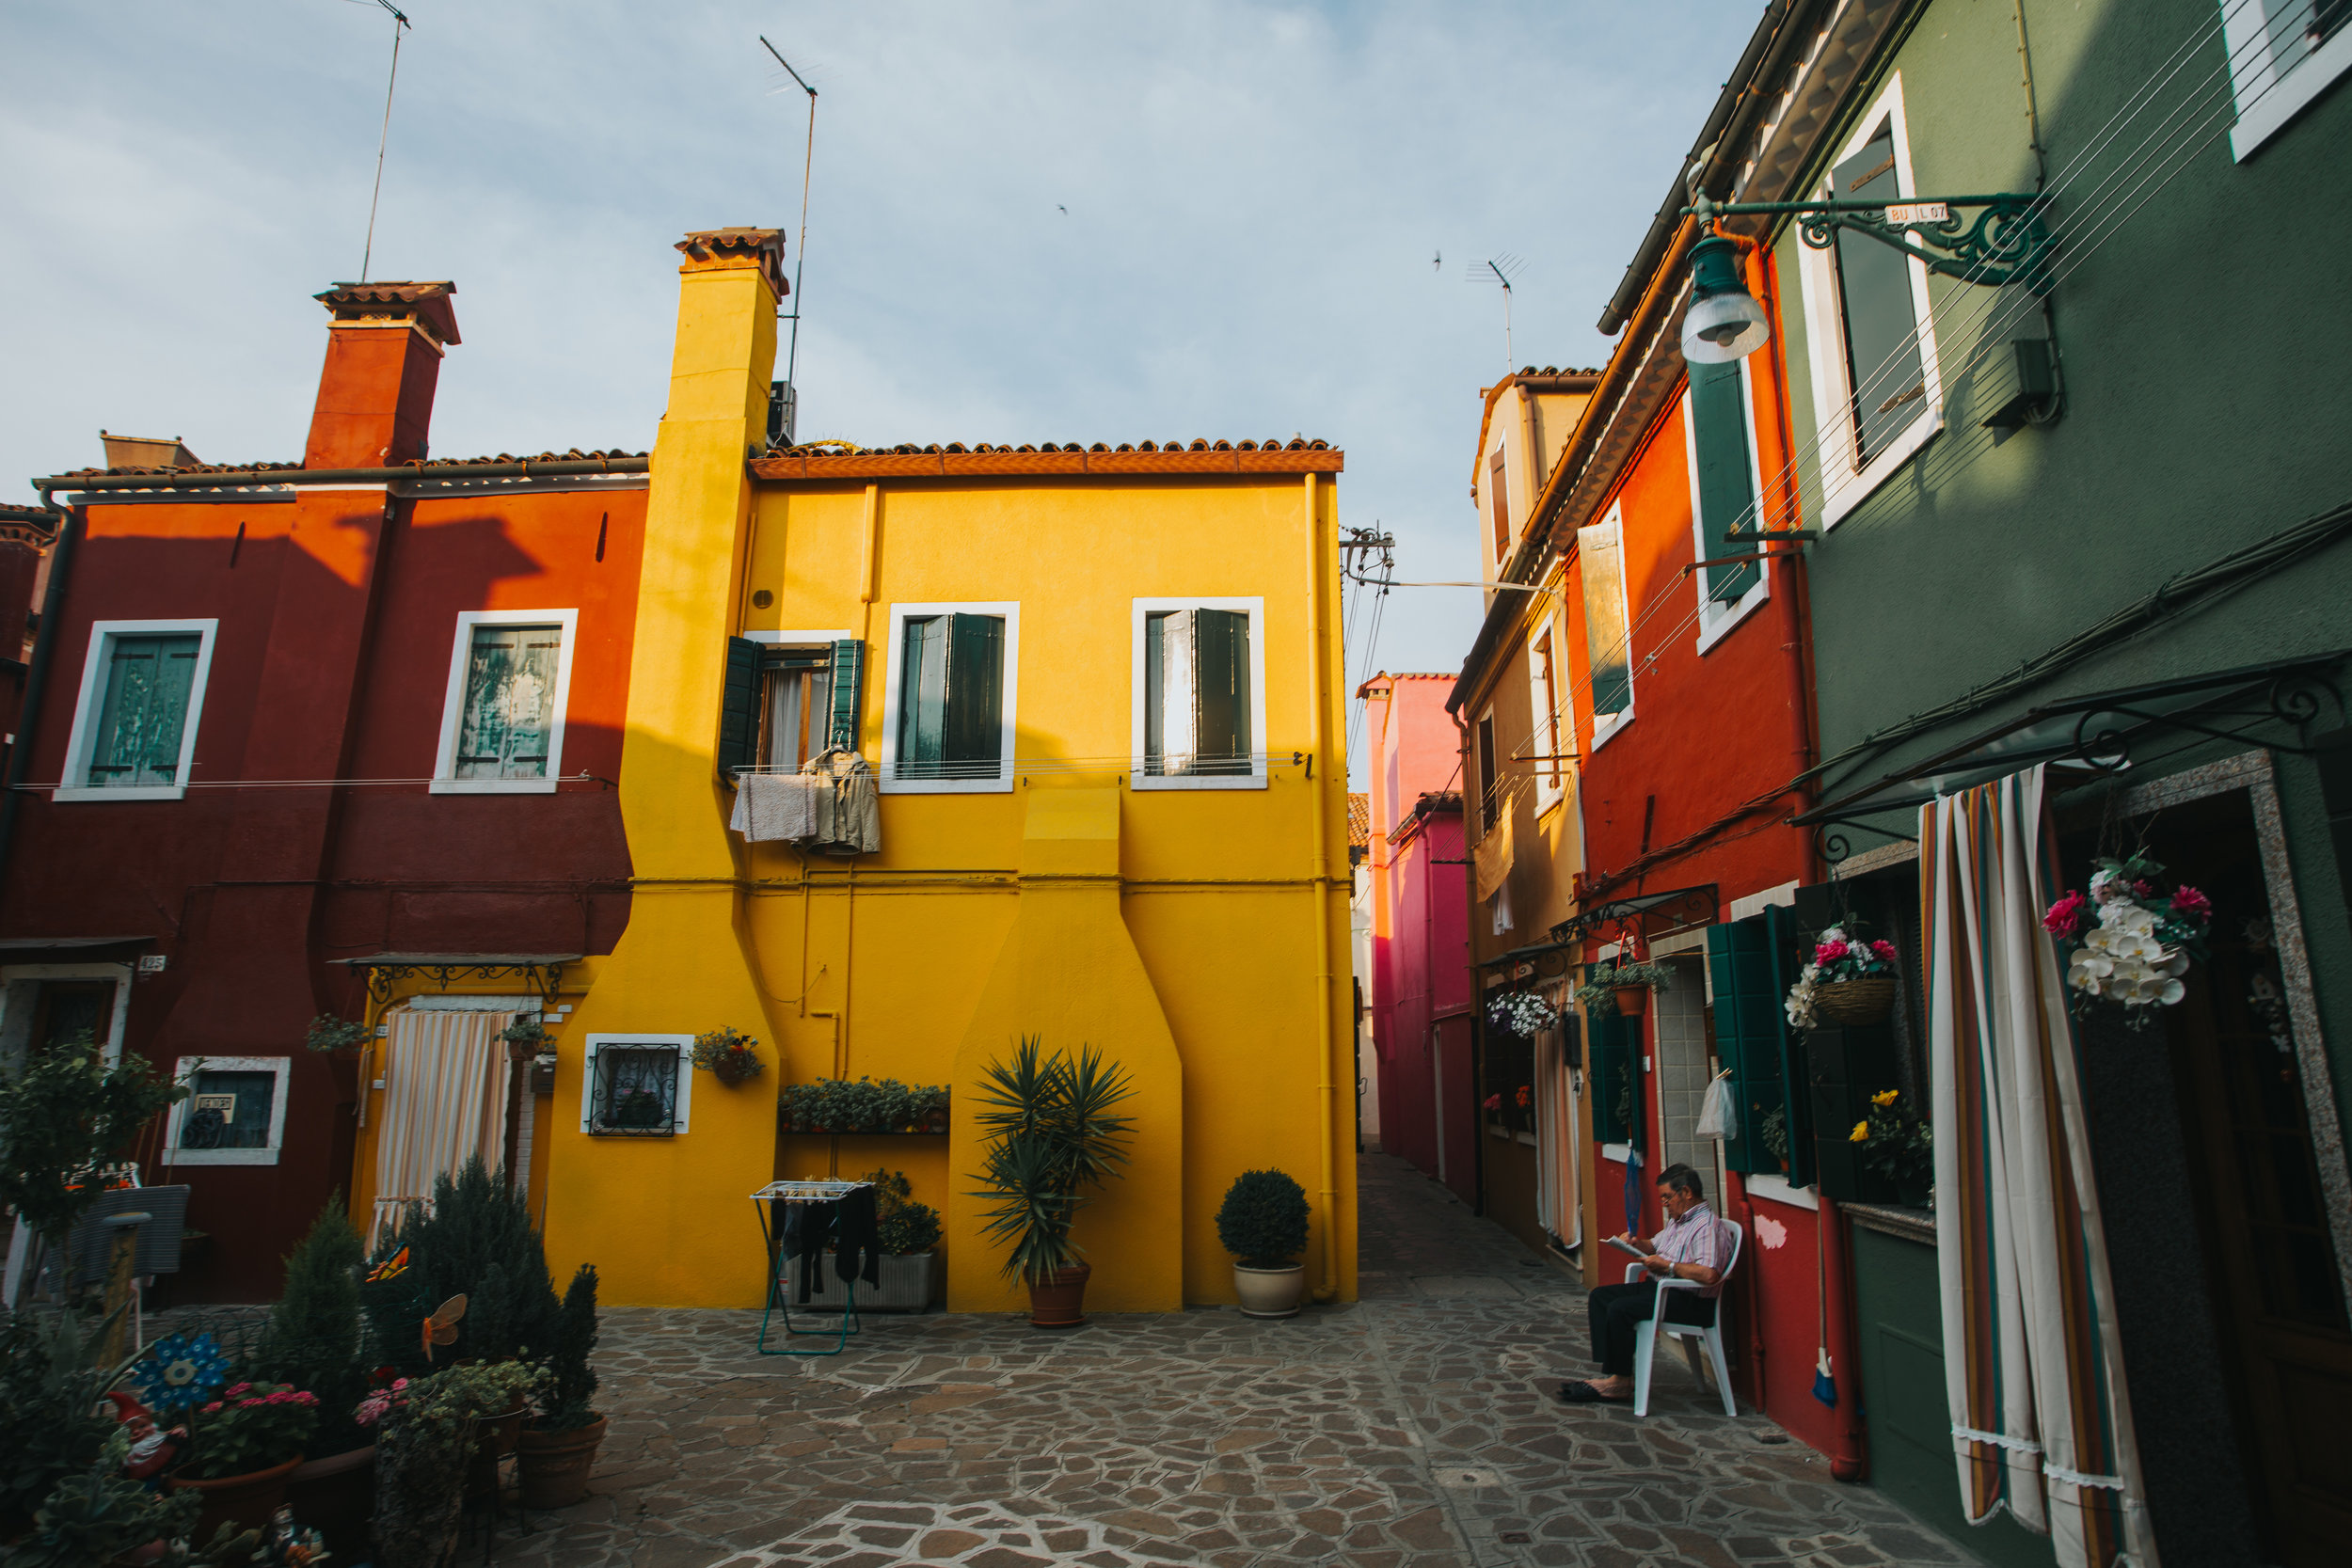 Is it worth going to Burano?